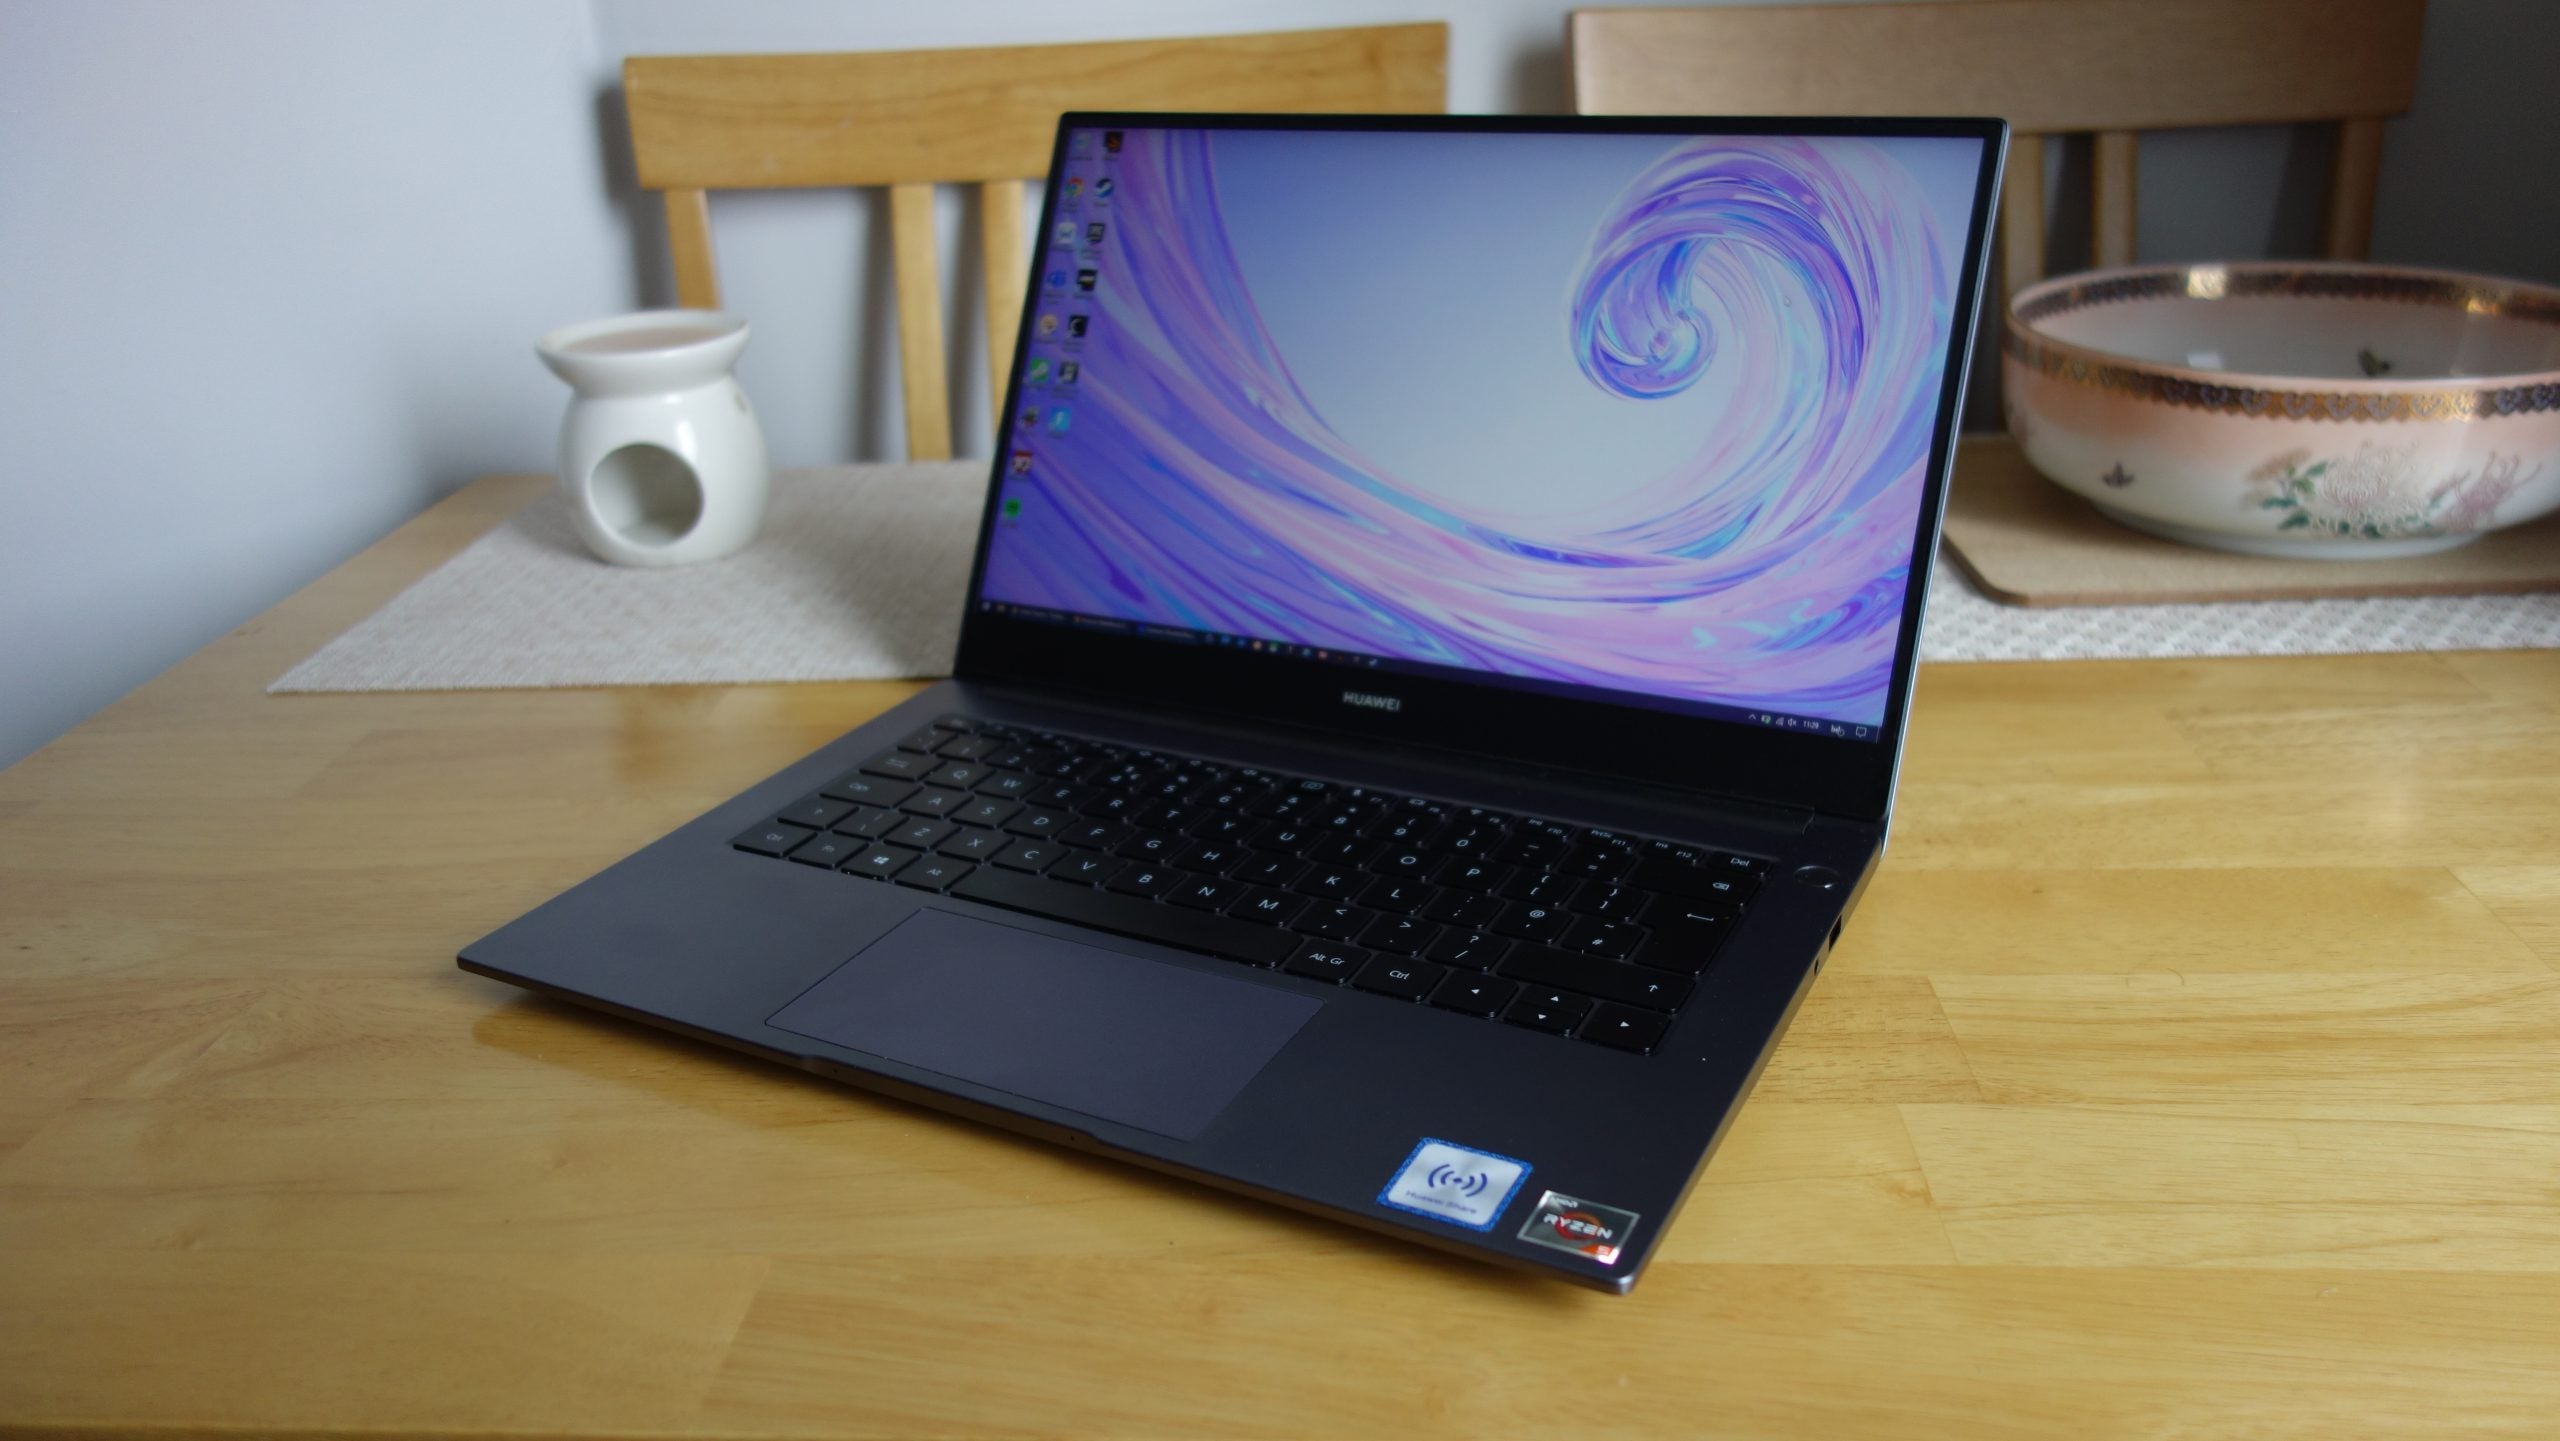 Need a powerful laptop for uni? The Huawei MateBook D 14 is on offer